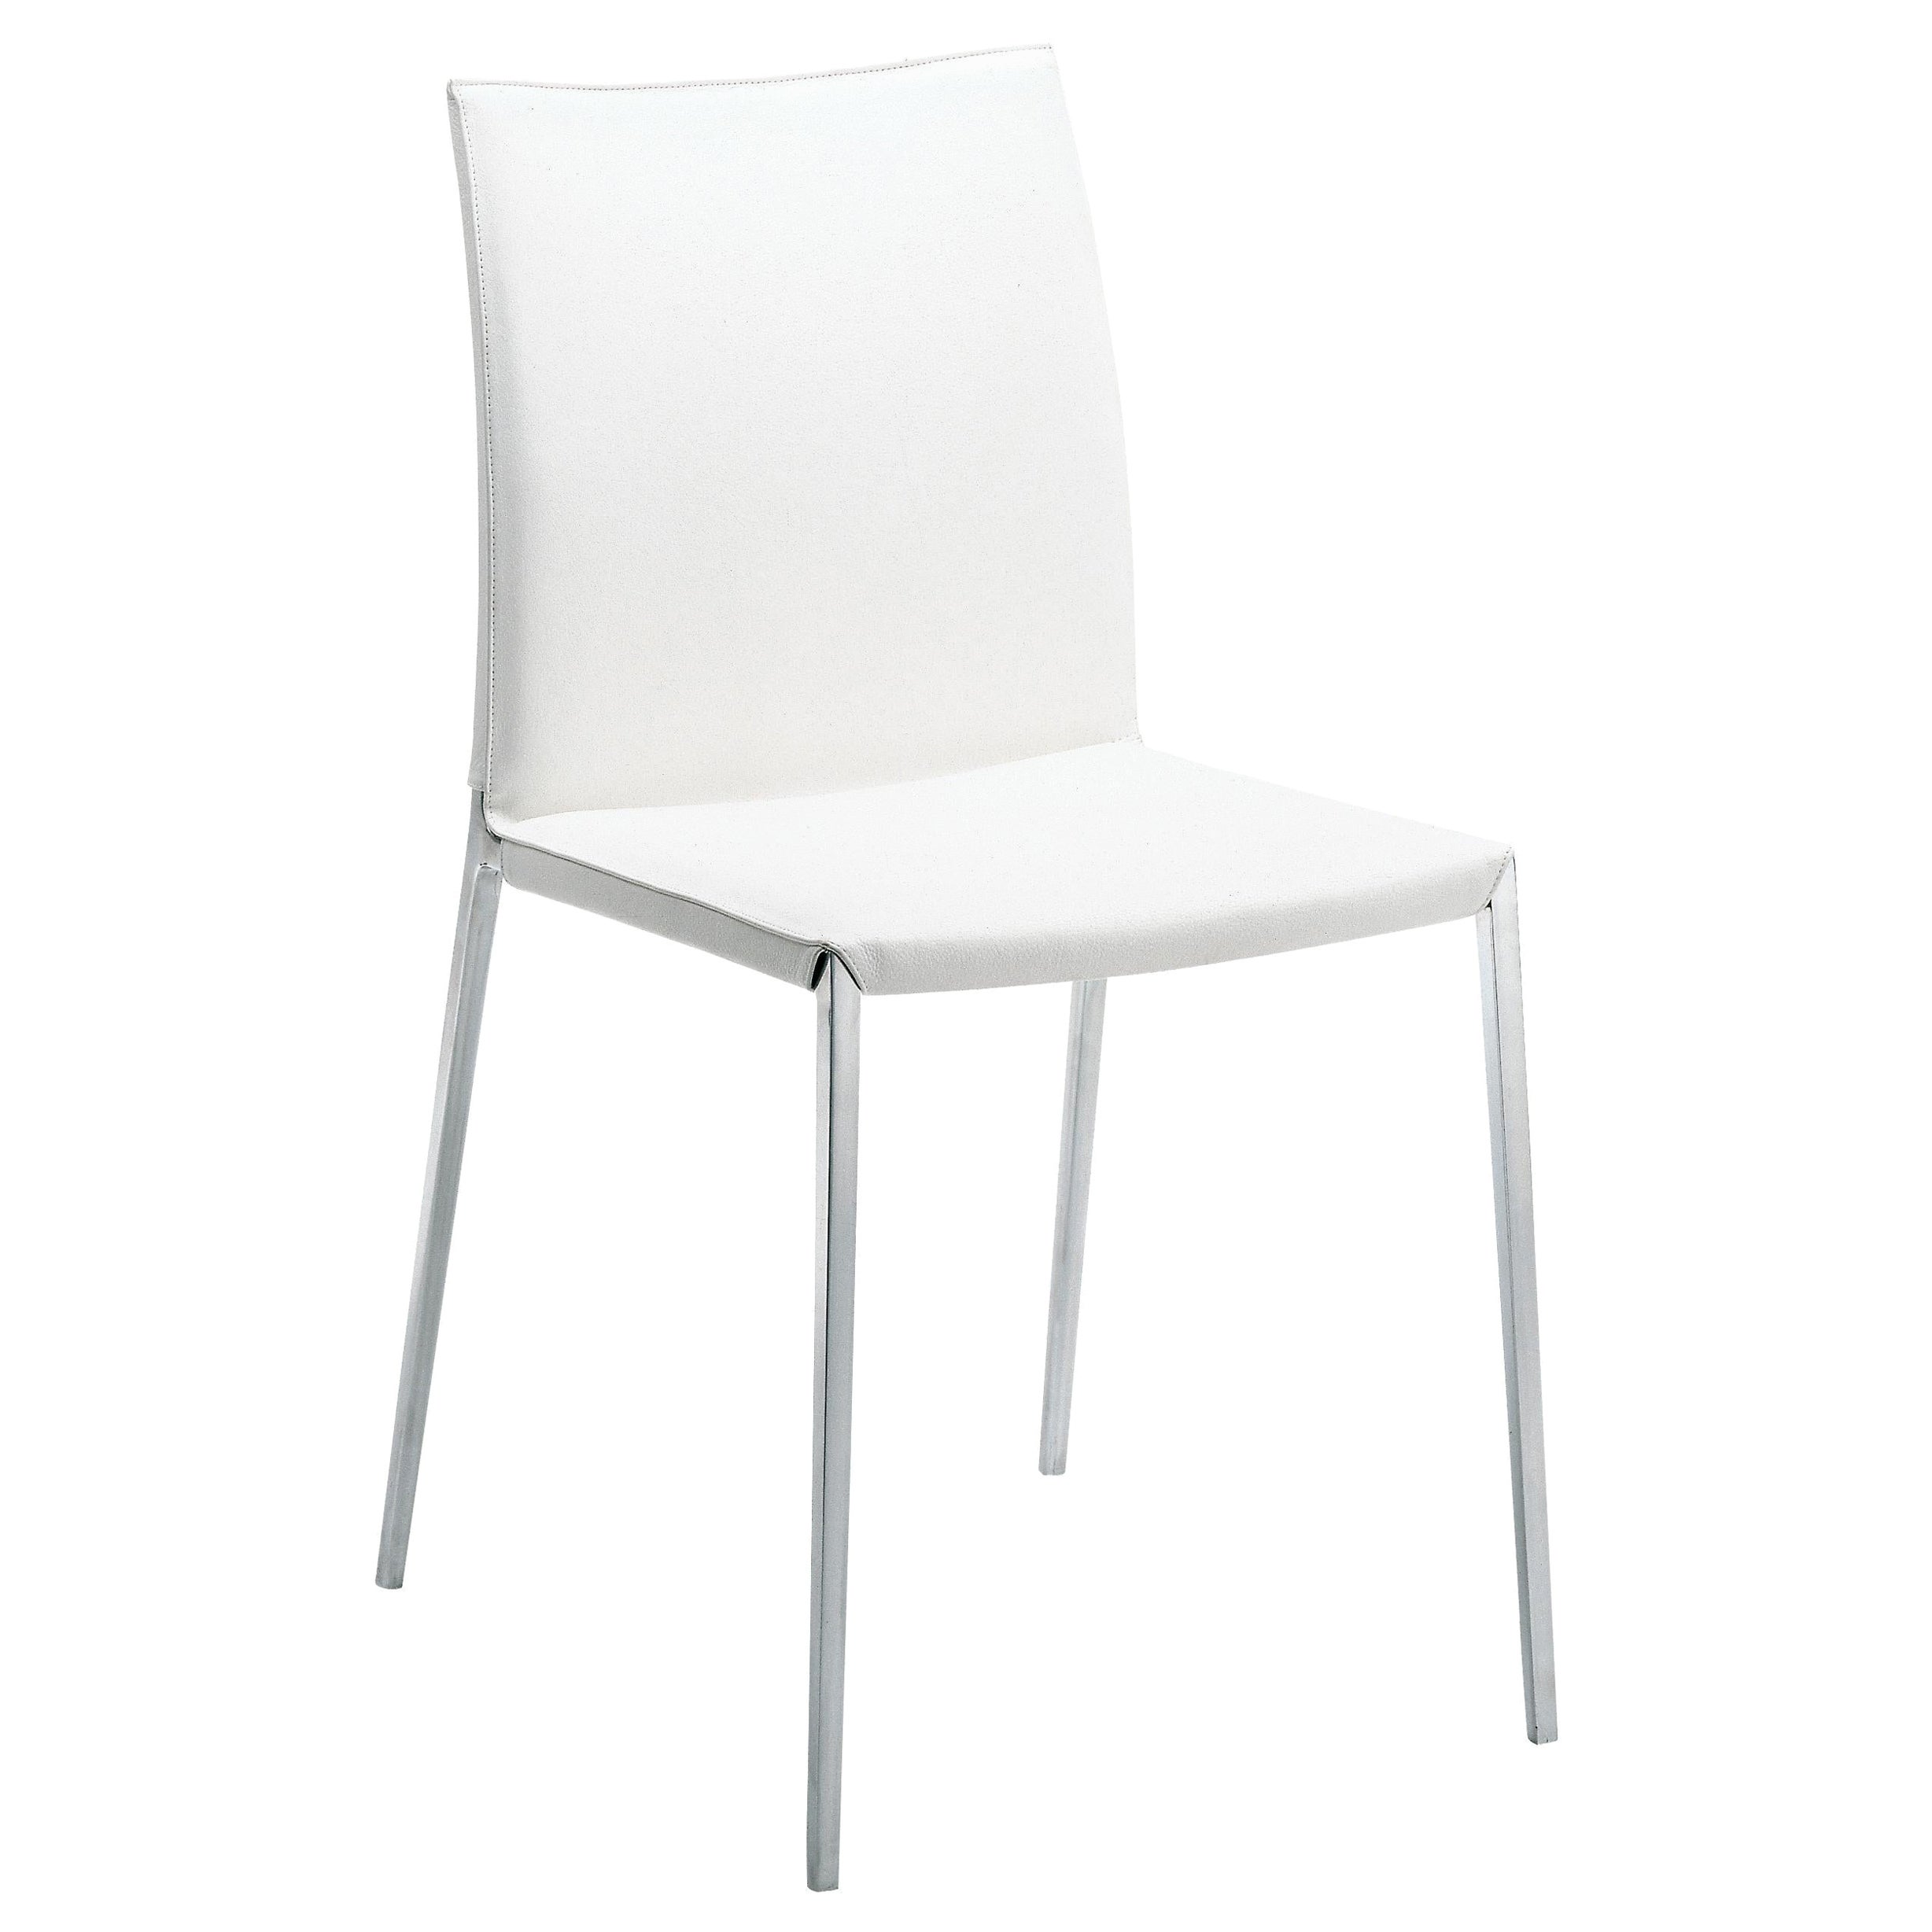 Zanotta Lia Chair in White Upholstery with Polished Aluminum Frame